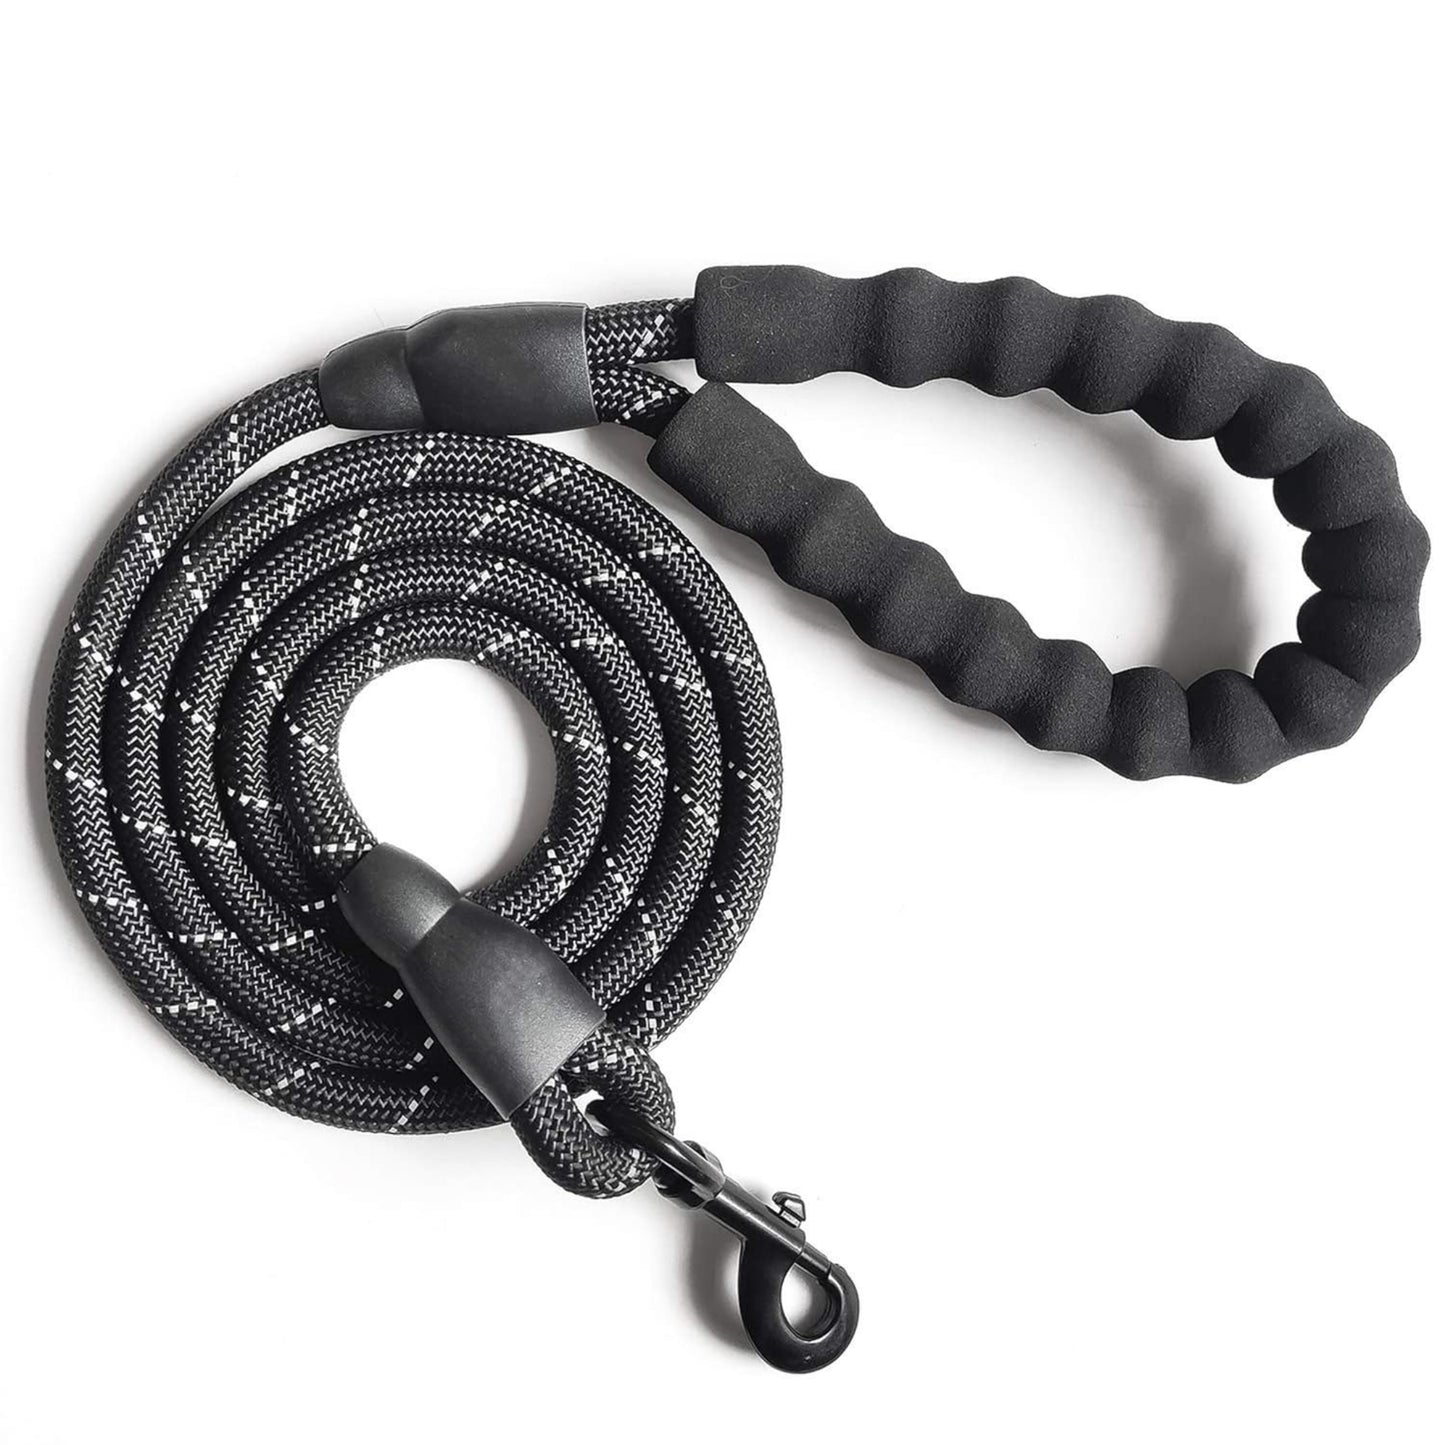 Foodie Puppies Reflective Snug Leash for Small to Medium Dogs, Black